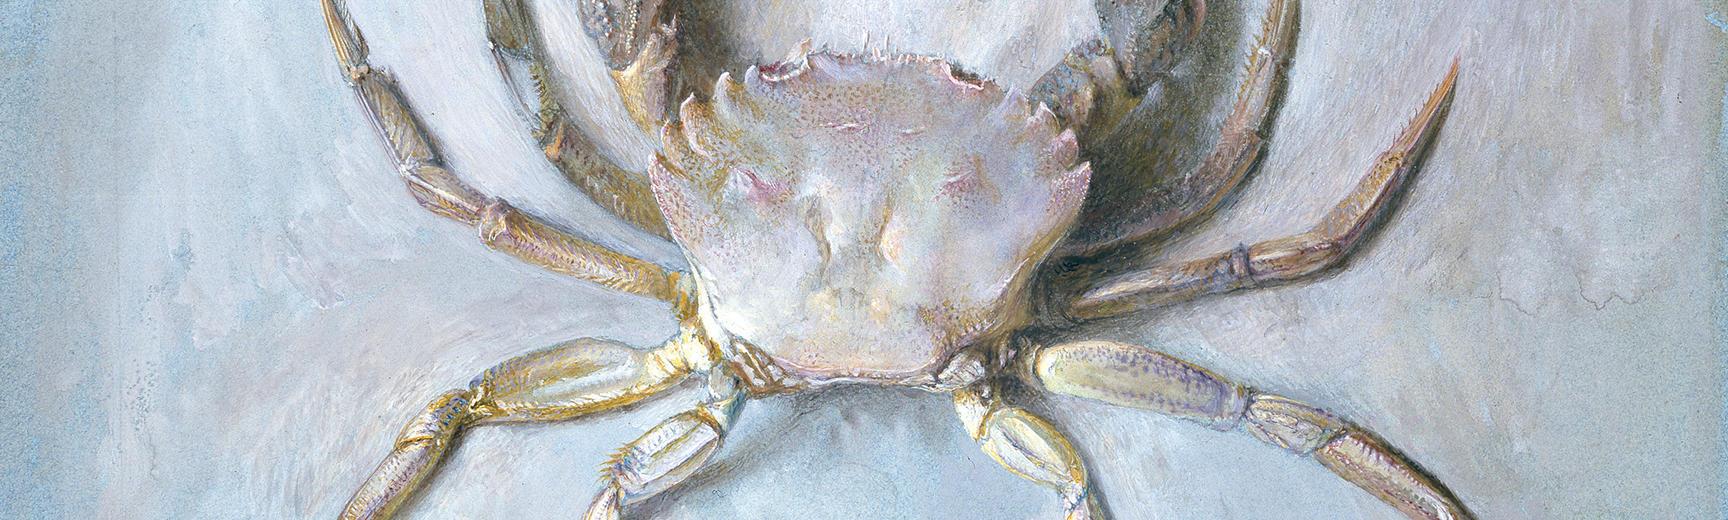 John Ruskin's silvery velvet crab drawing featured in the Pre-Raphaelites exhibition